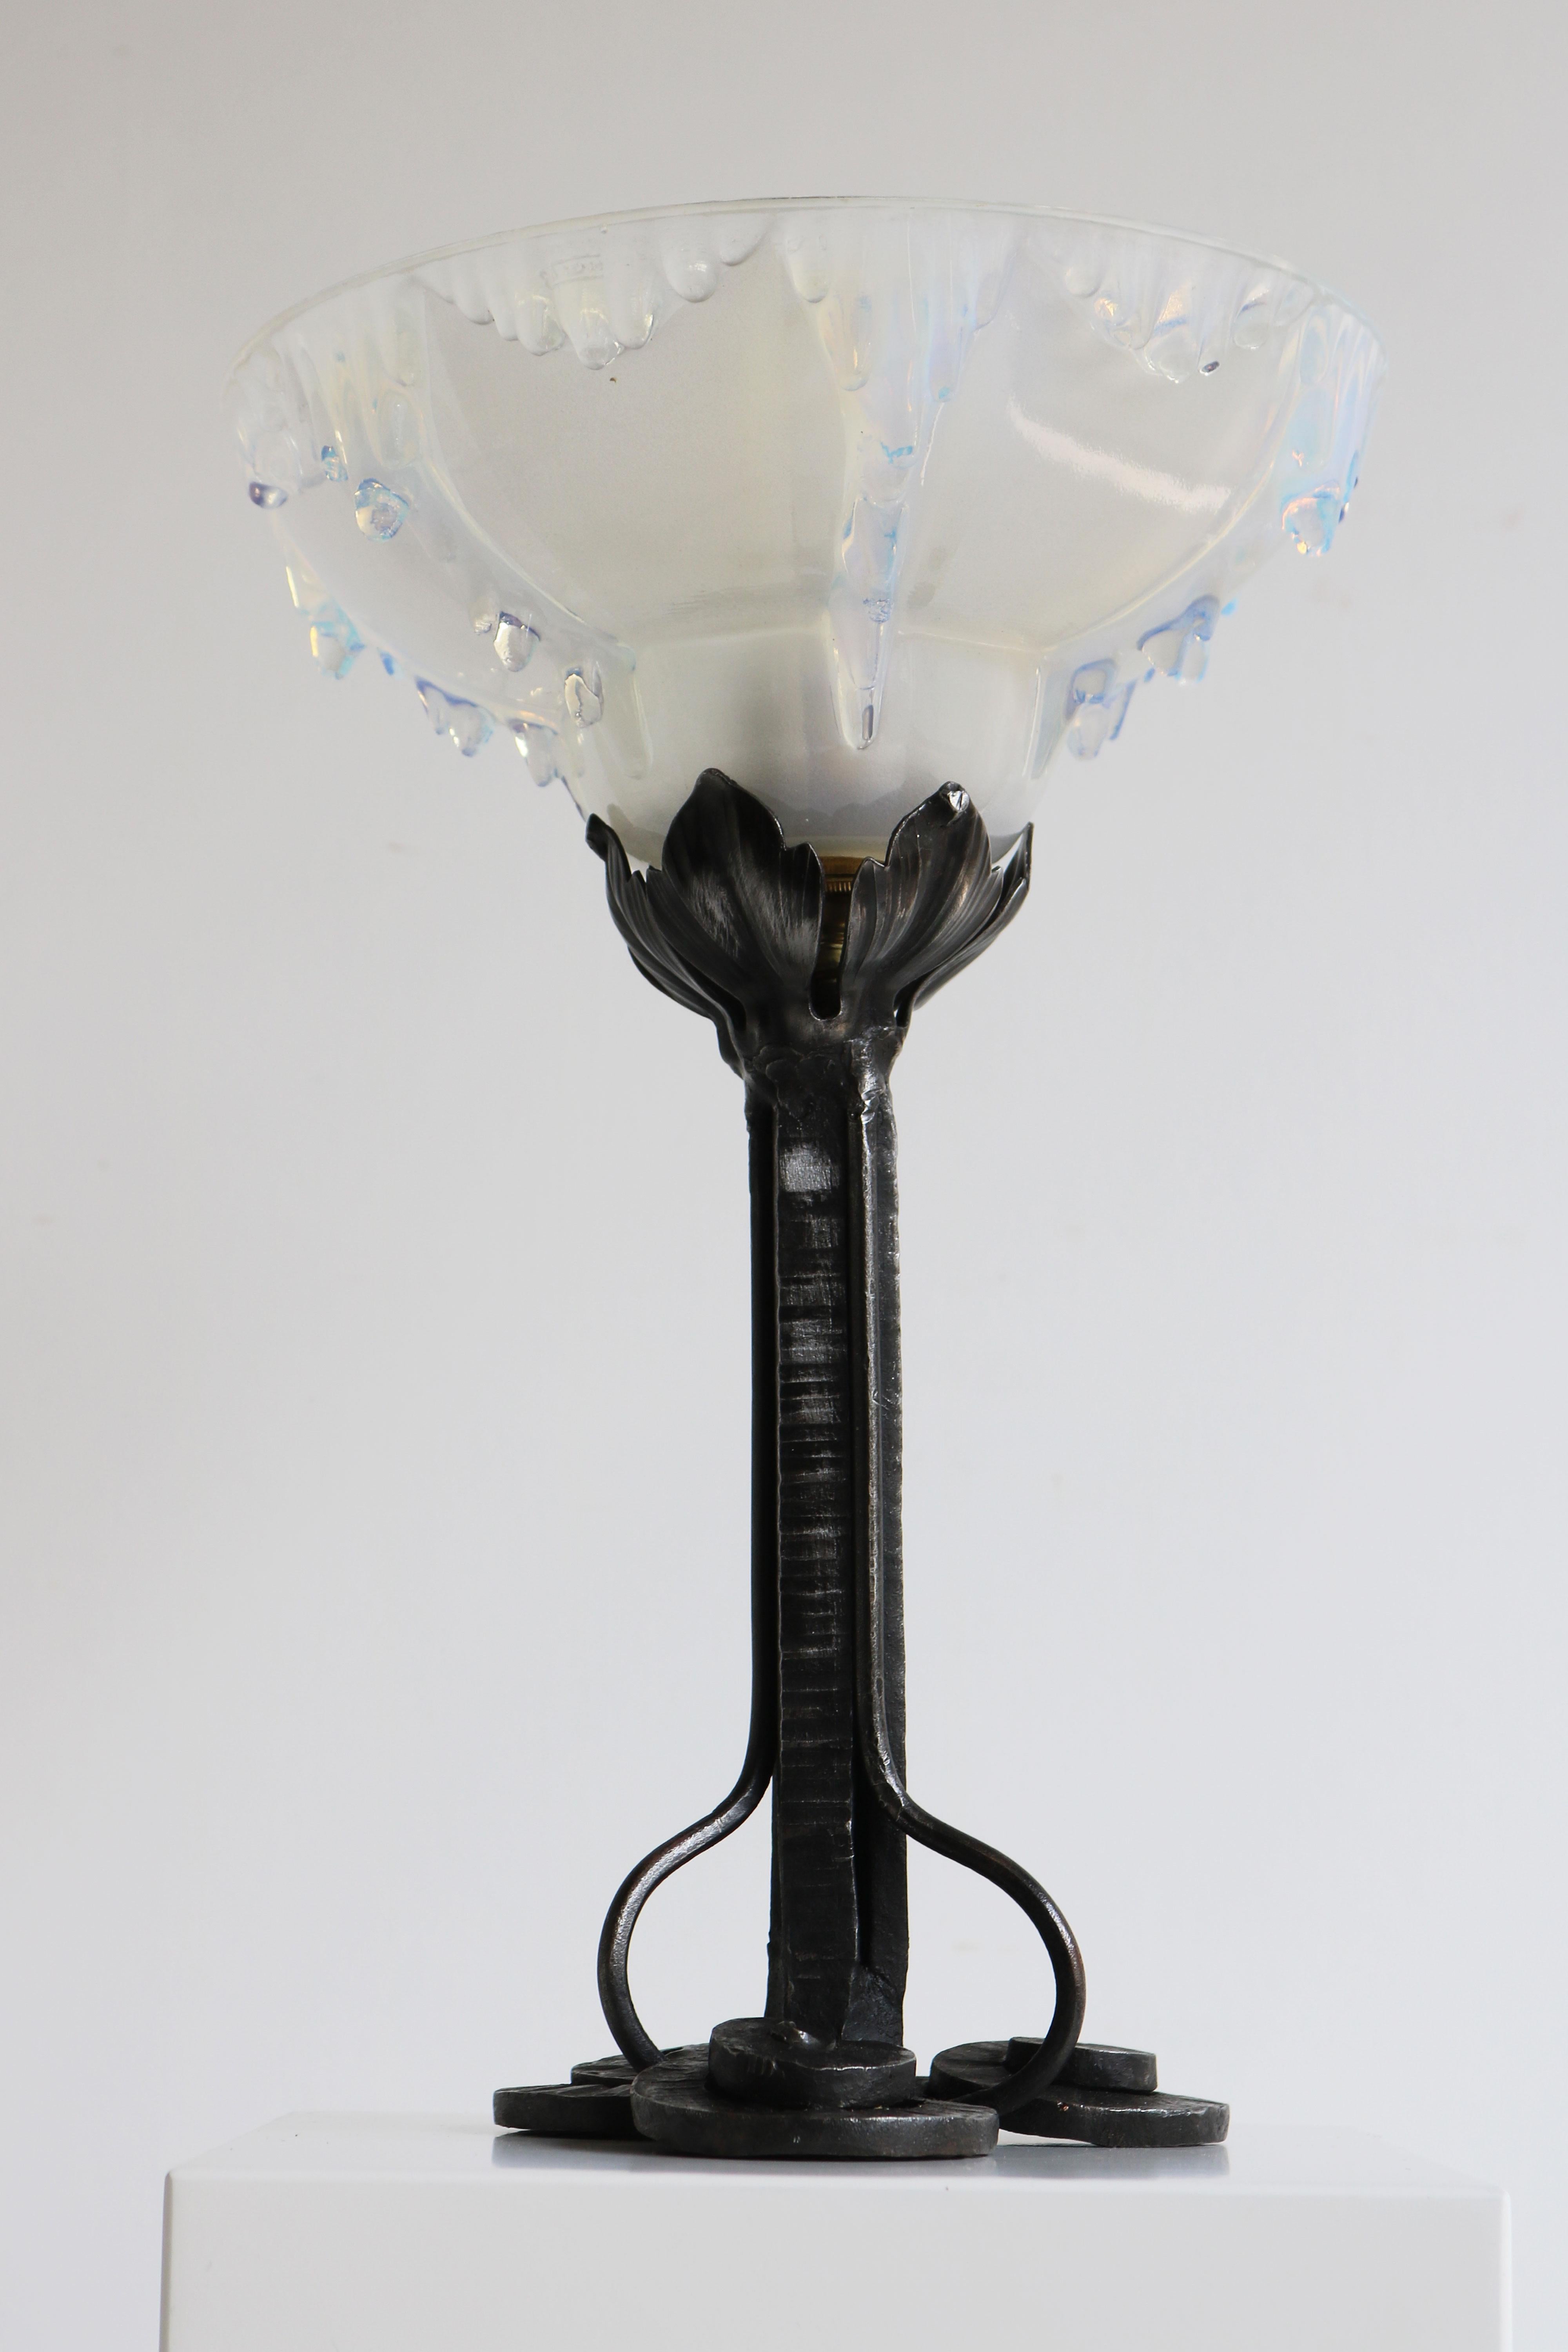 Antique Art Deco Table Lamp Design by Ezan 1930 France Wrought Iron & Ice Glass For Sale 4